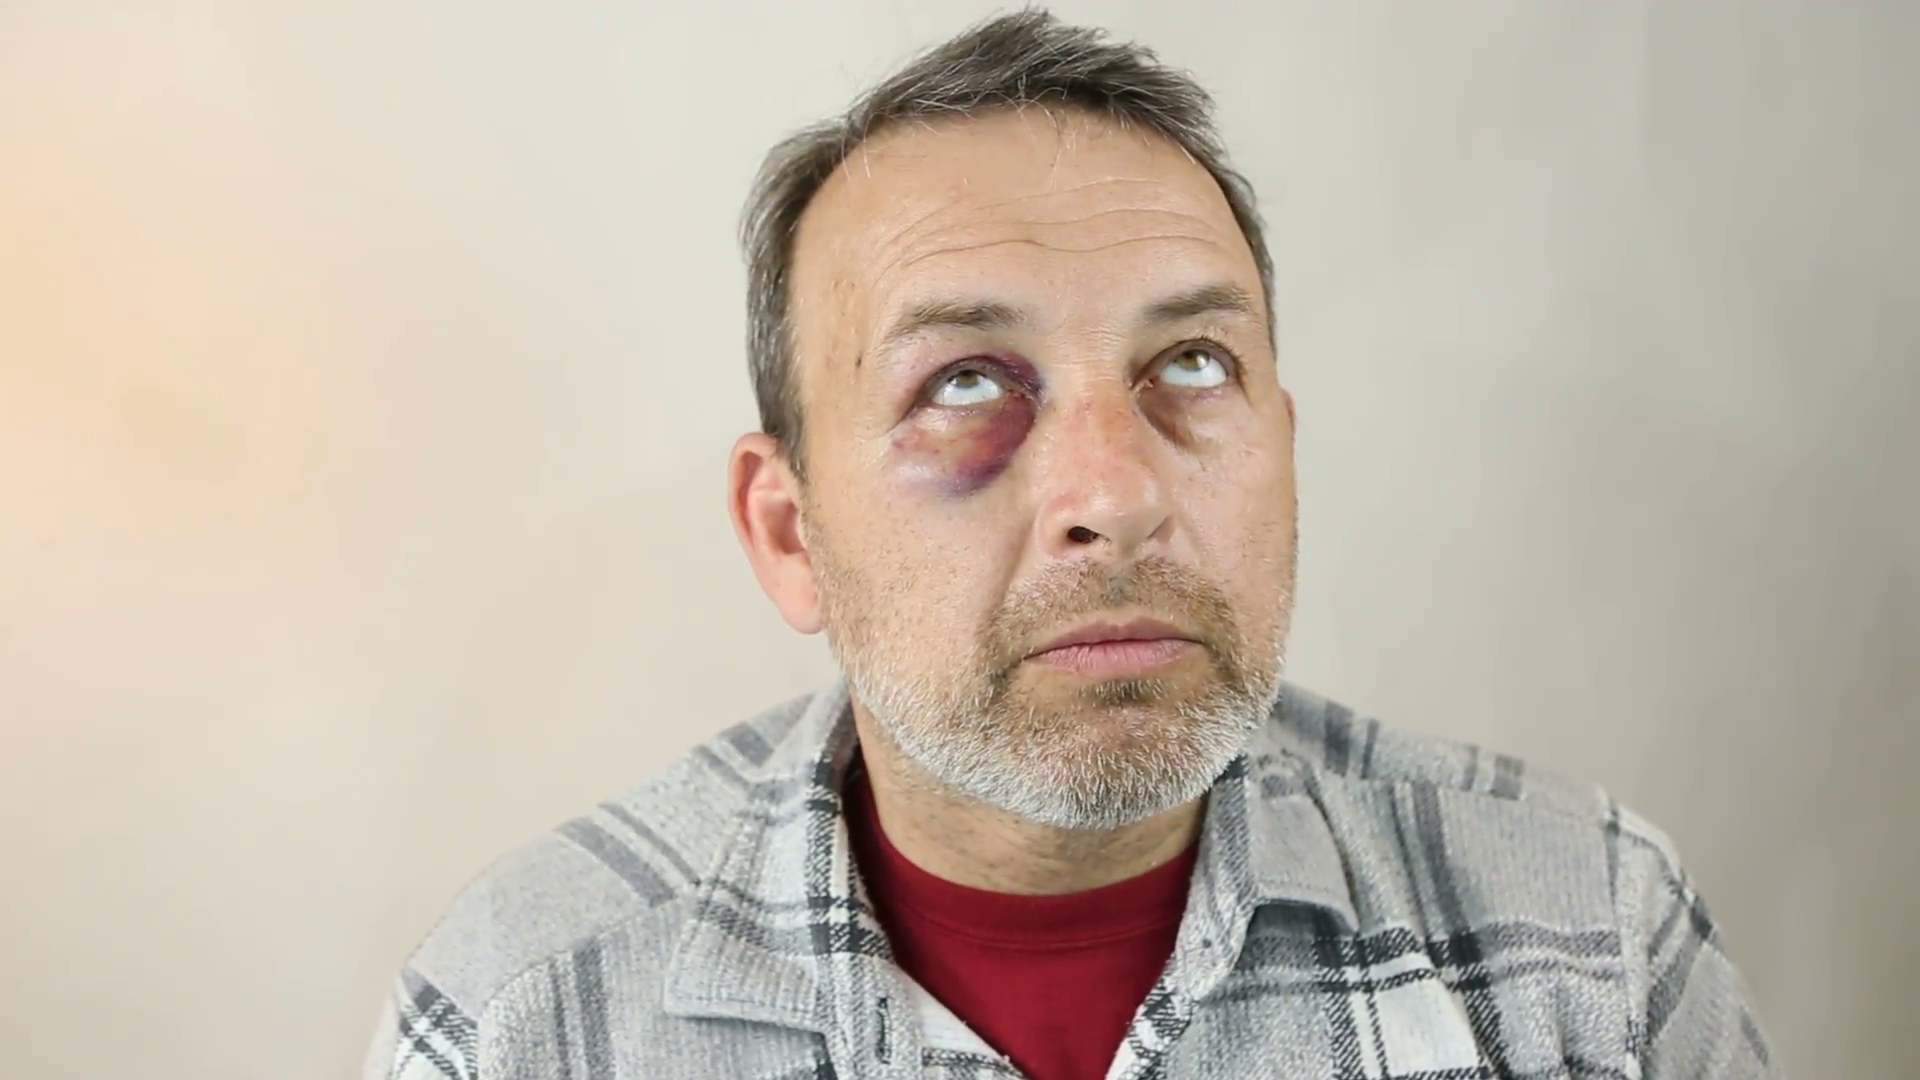 Man with Black Eye, Shiner. Man's face after the fight and assault ...